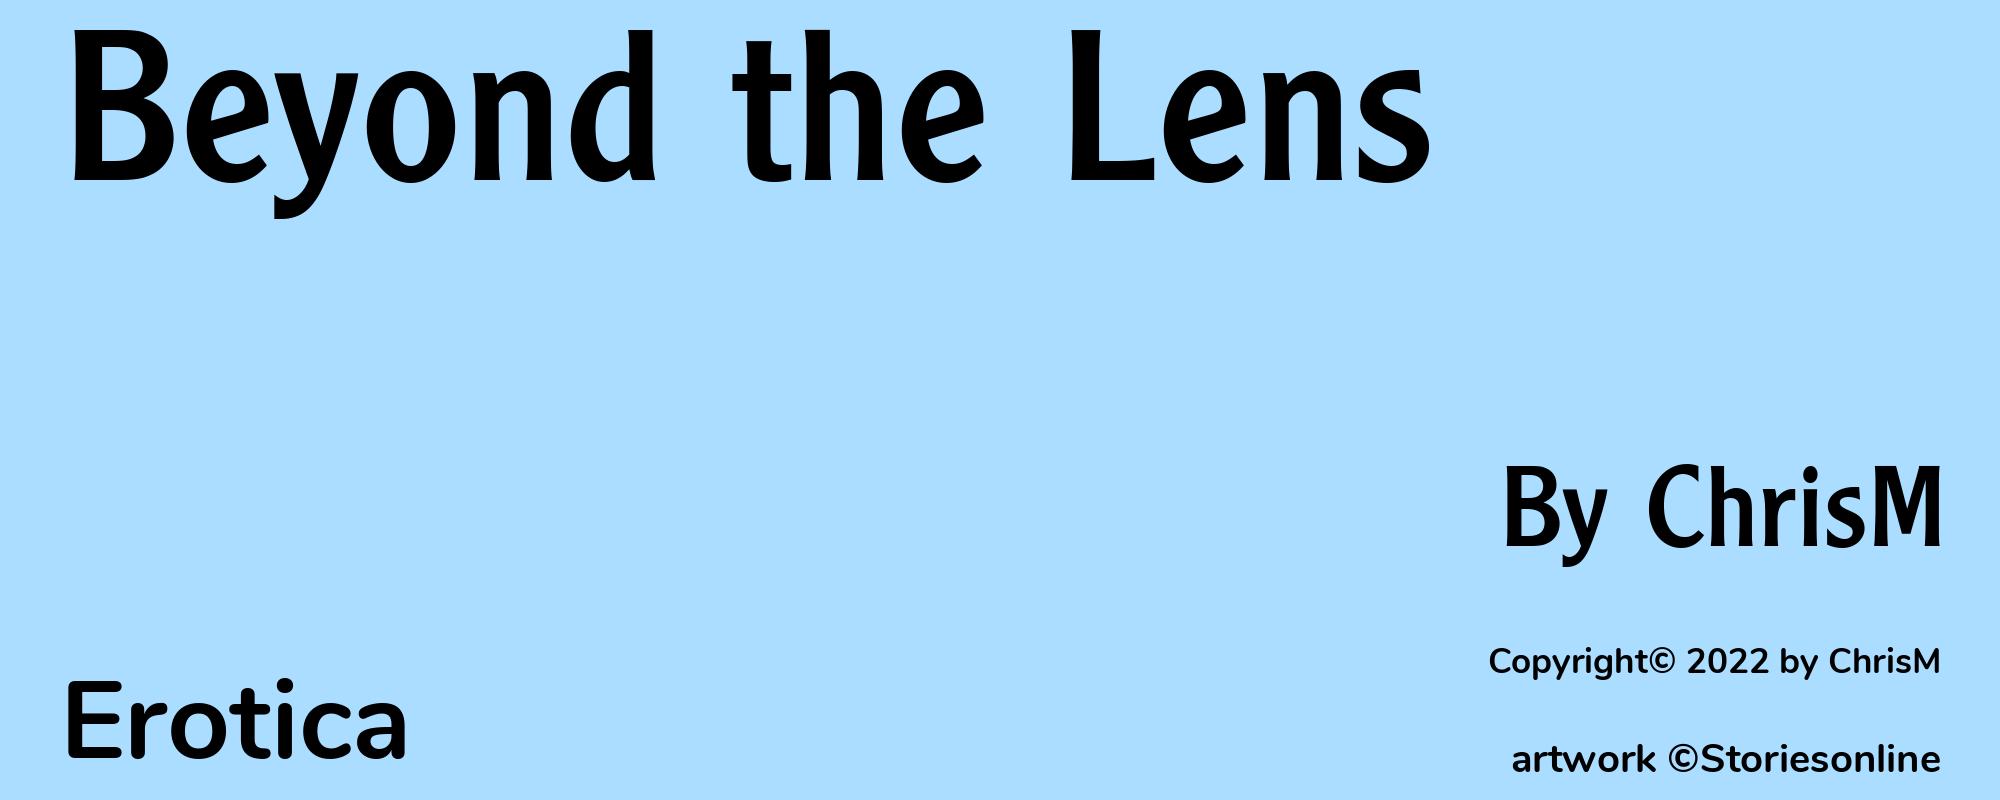 Beyond the Lens - Cover